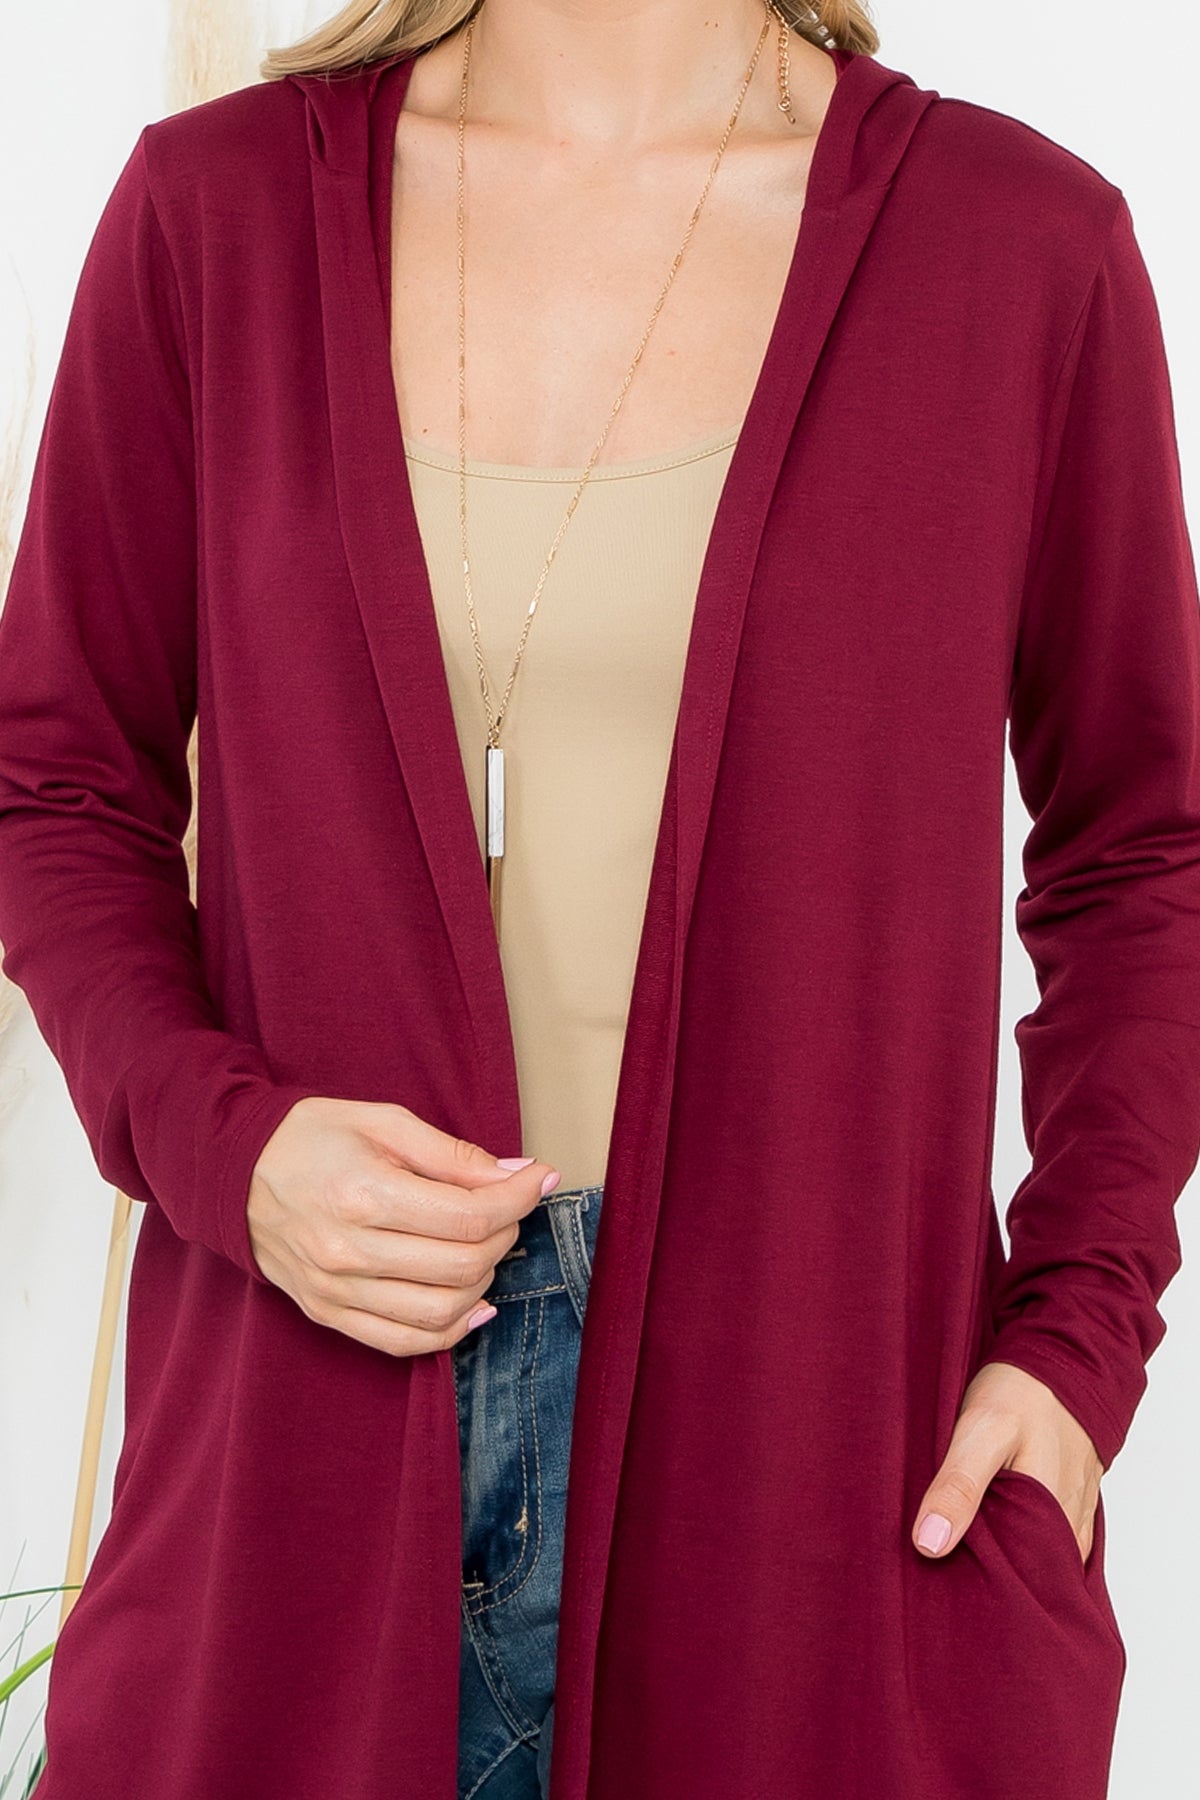 PLUS SIZE LONG SLEEVE OPEN FRONT FRENCH TERRY HOODIE CARDIGAN 3-2-1